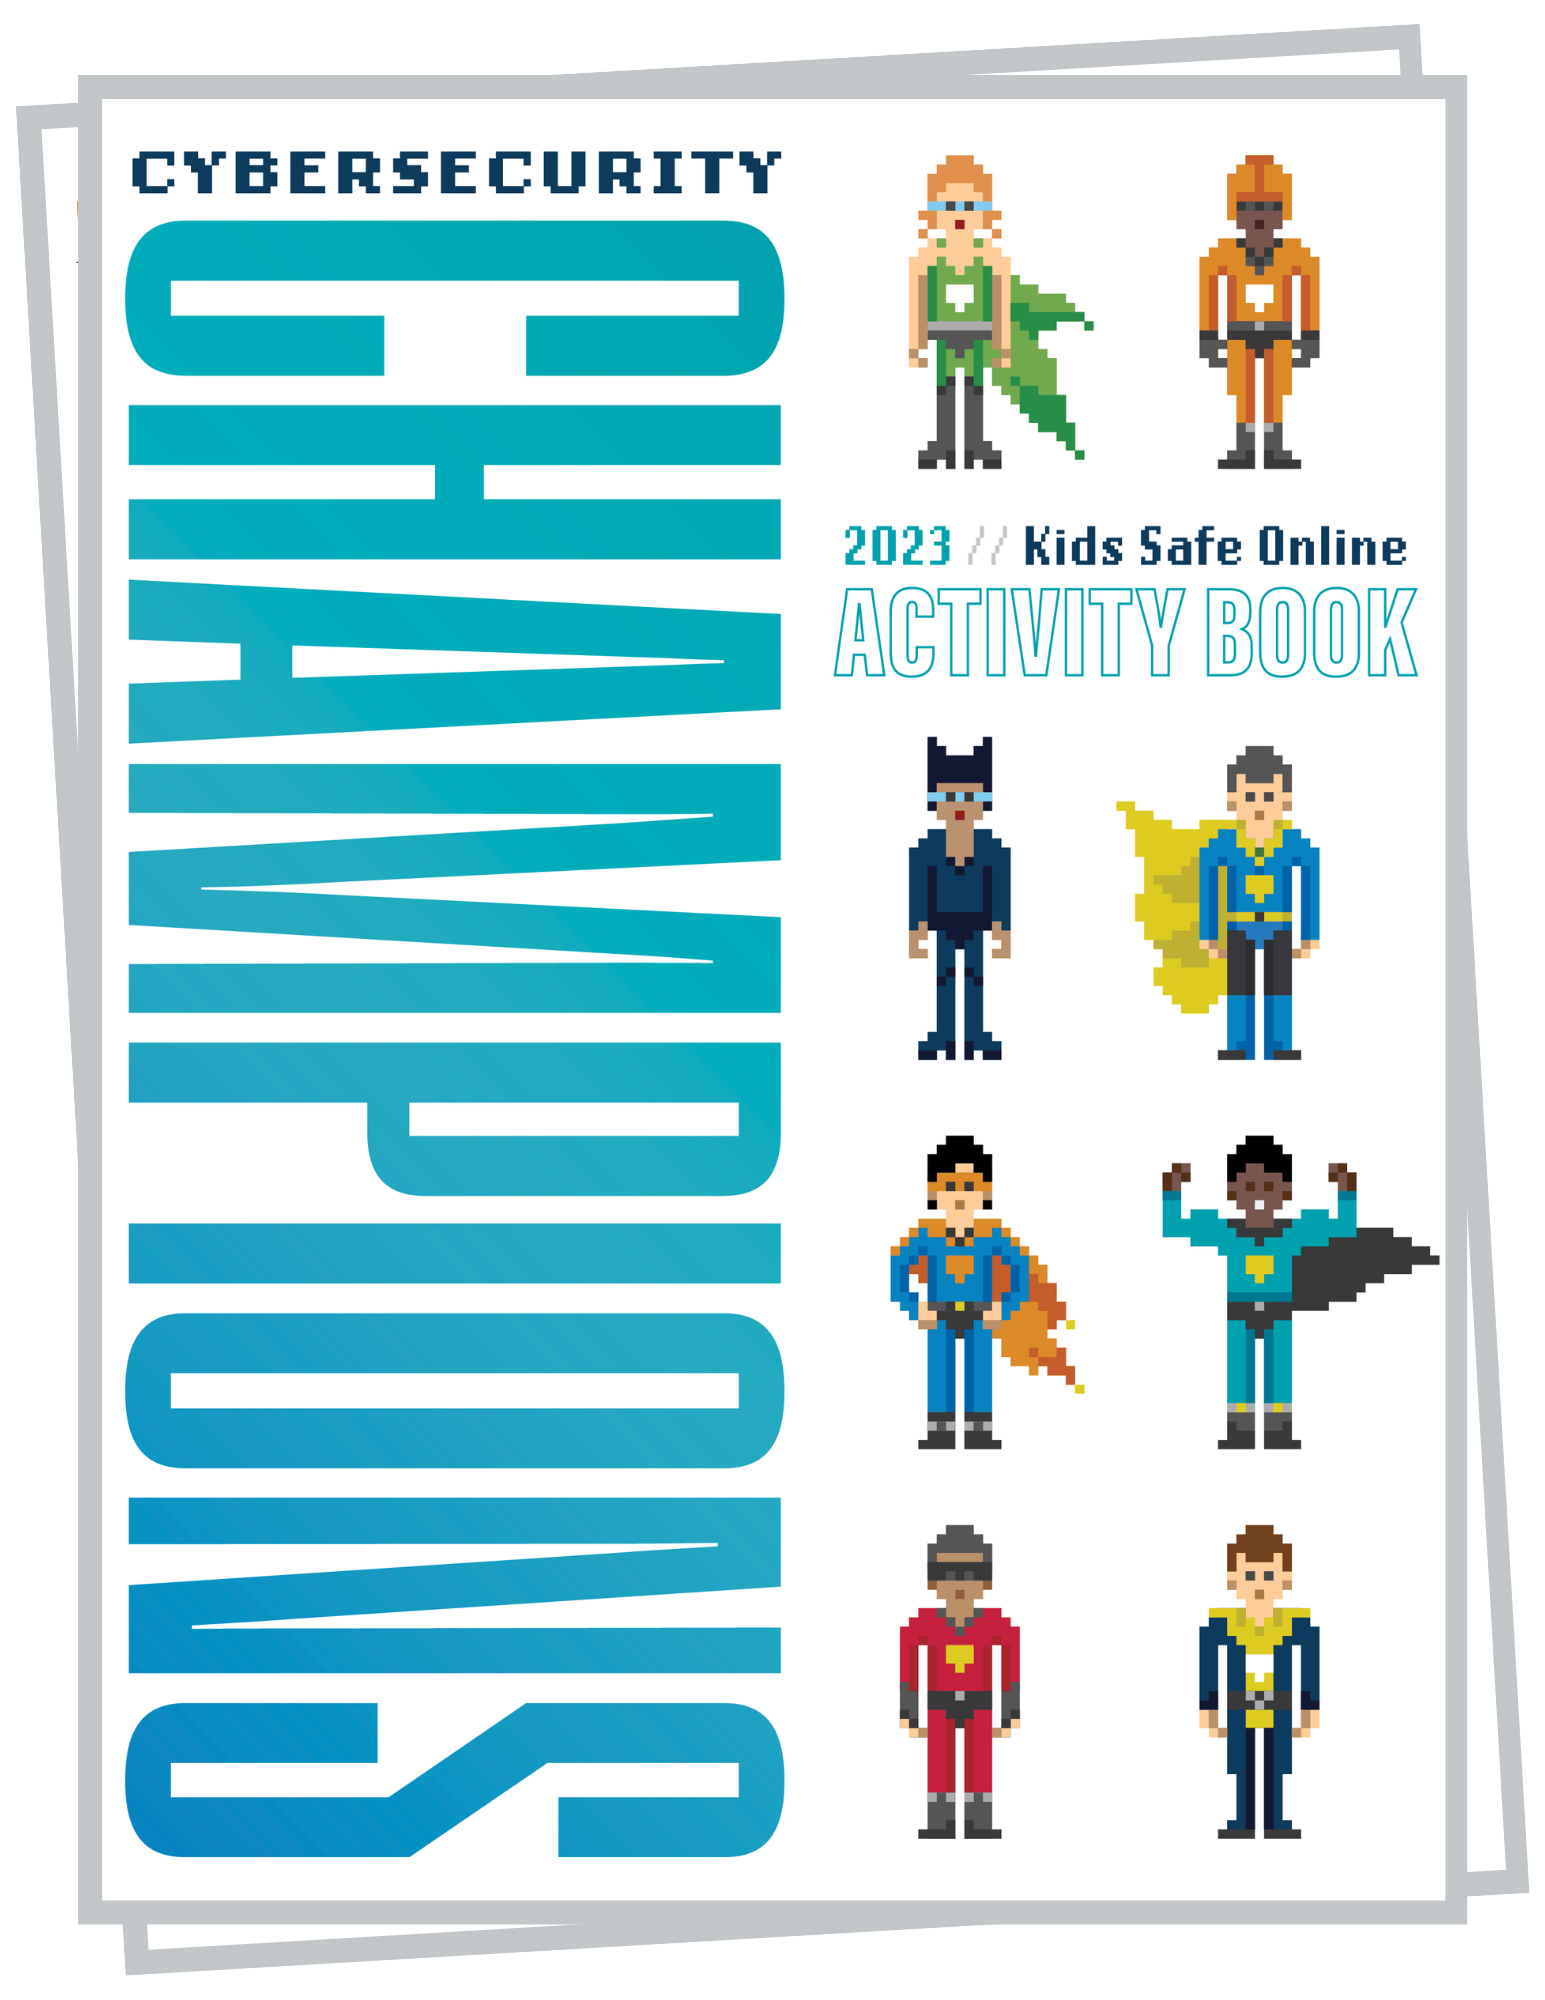 Keep Your Kids Safe Online with Our 2022 Activity Book